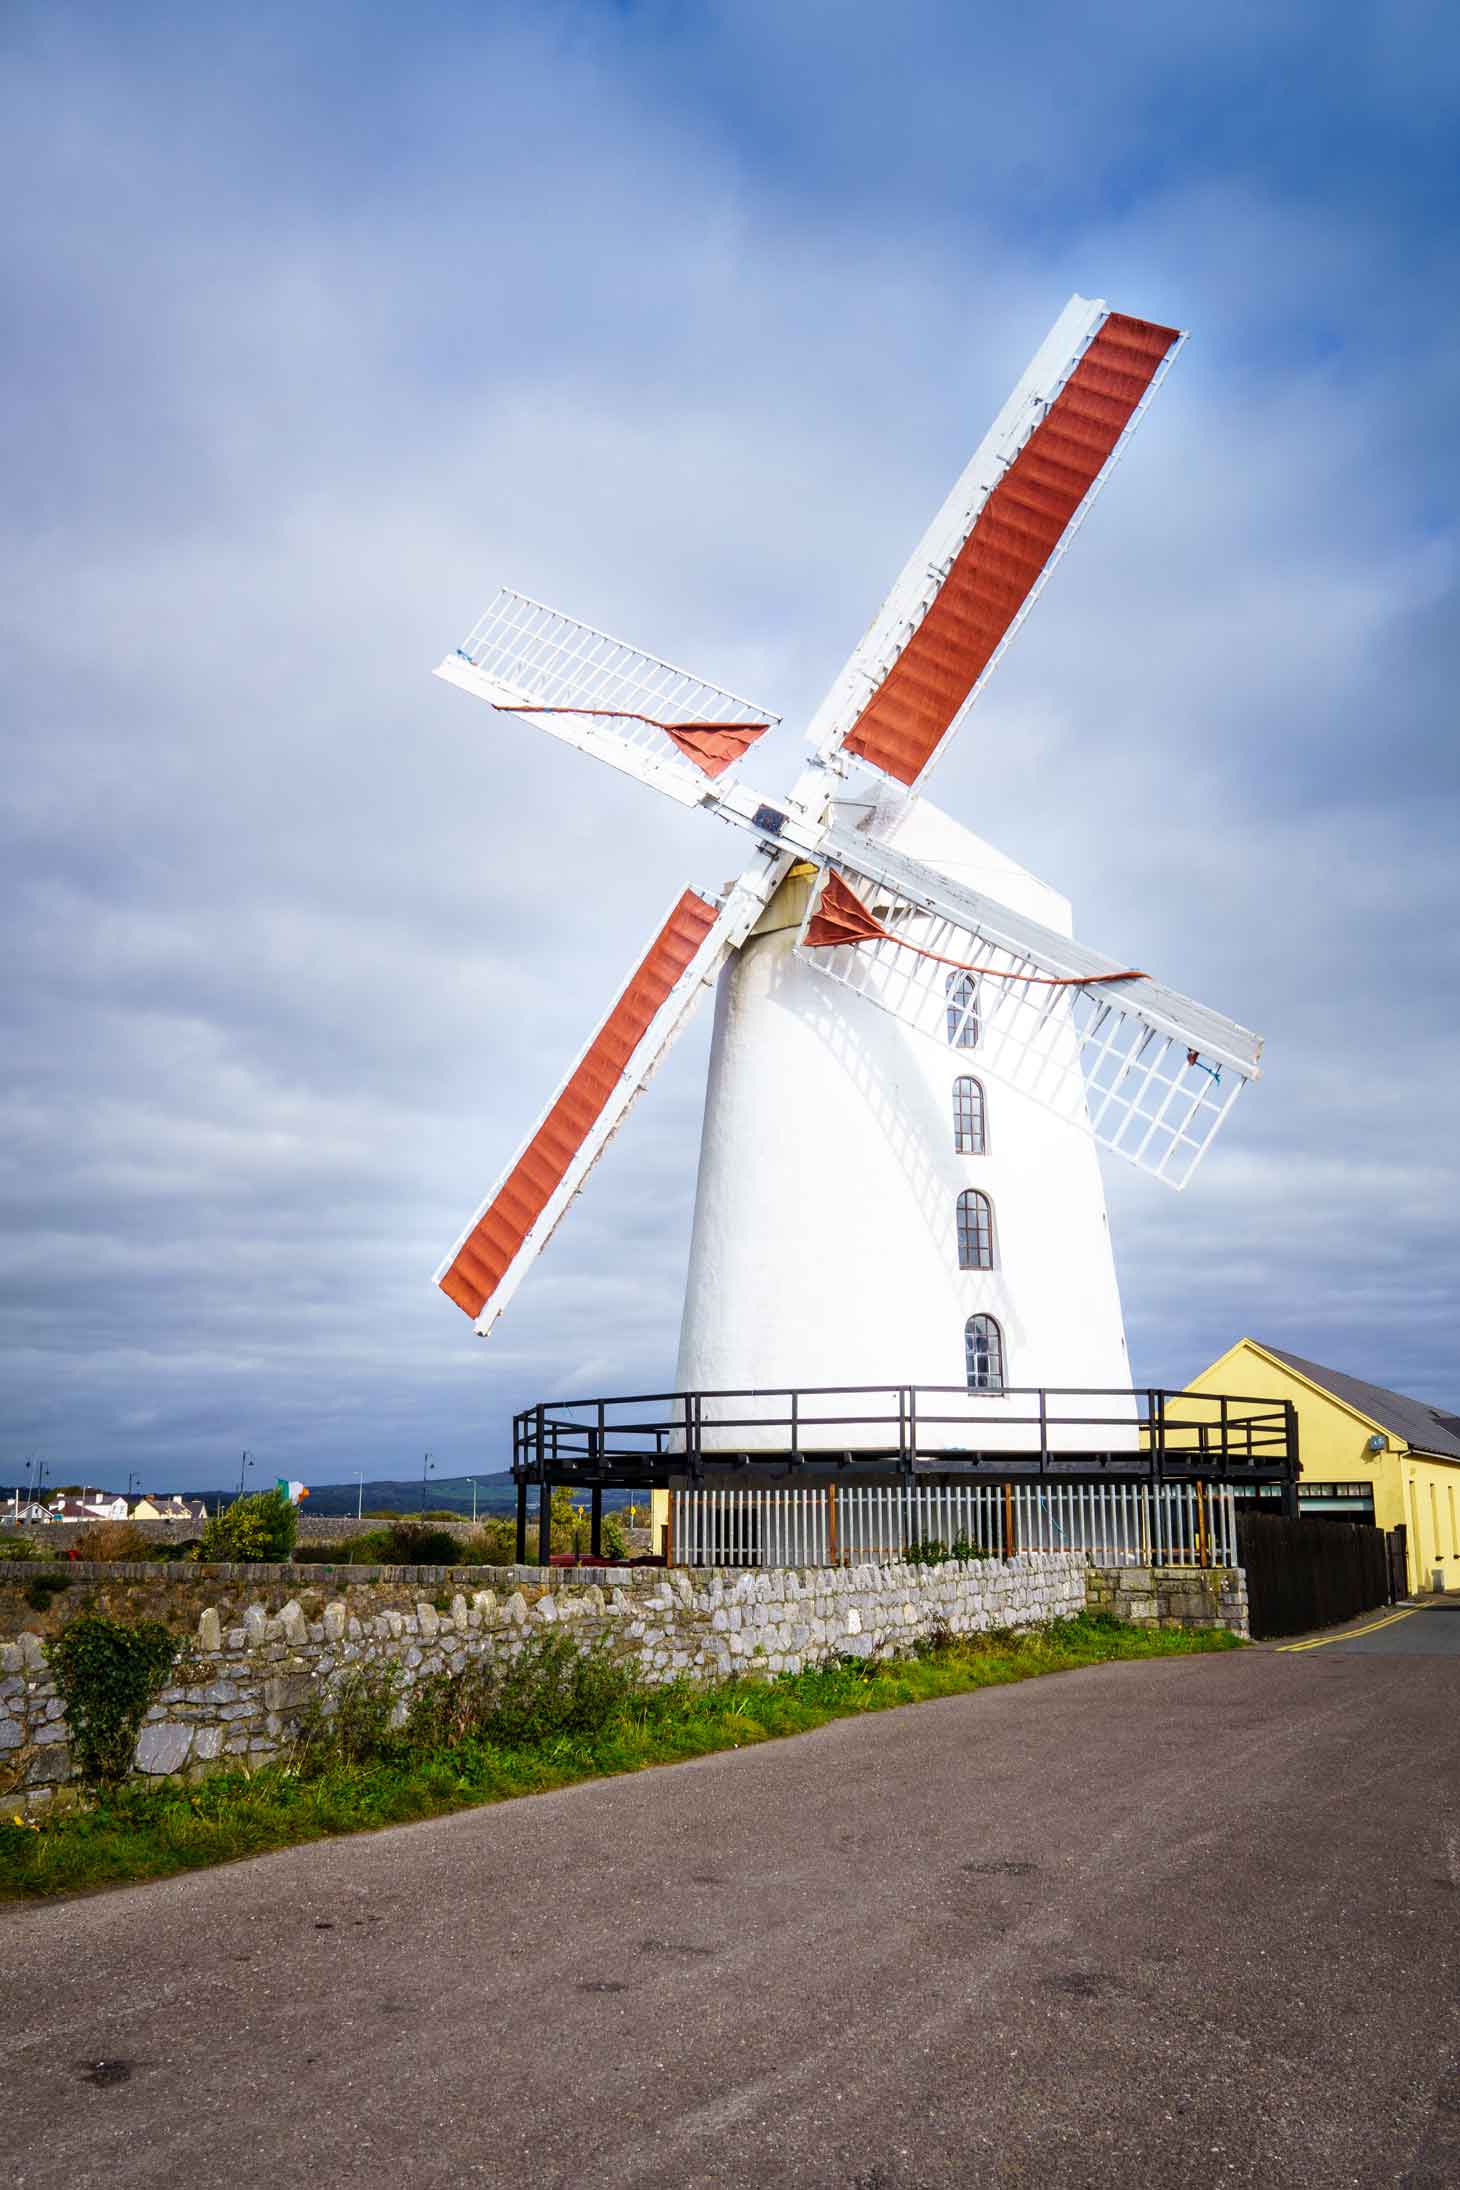 Blennerville Windmill located in the Republic of Ireland in Kerry County is a must see family site 